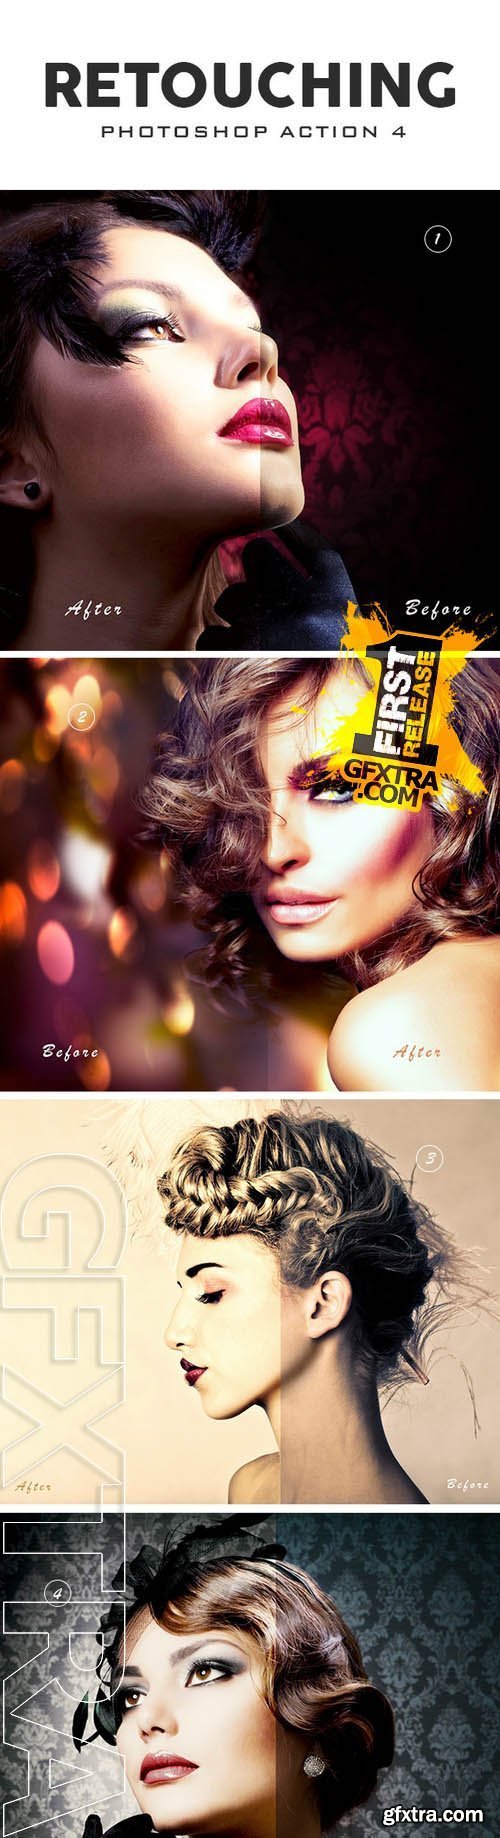 Graphicriver Retouching Photoshop Action 4 10593439